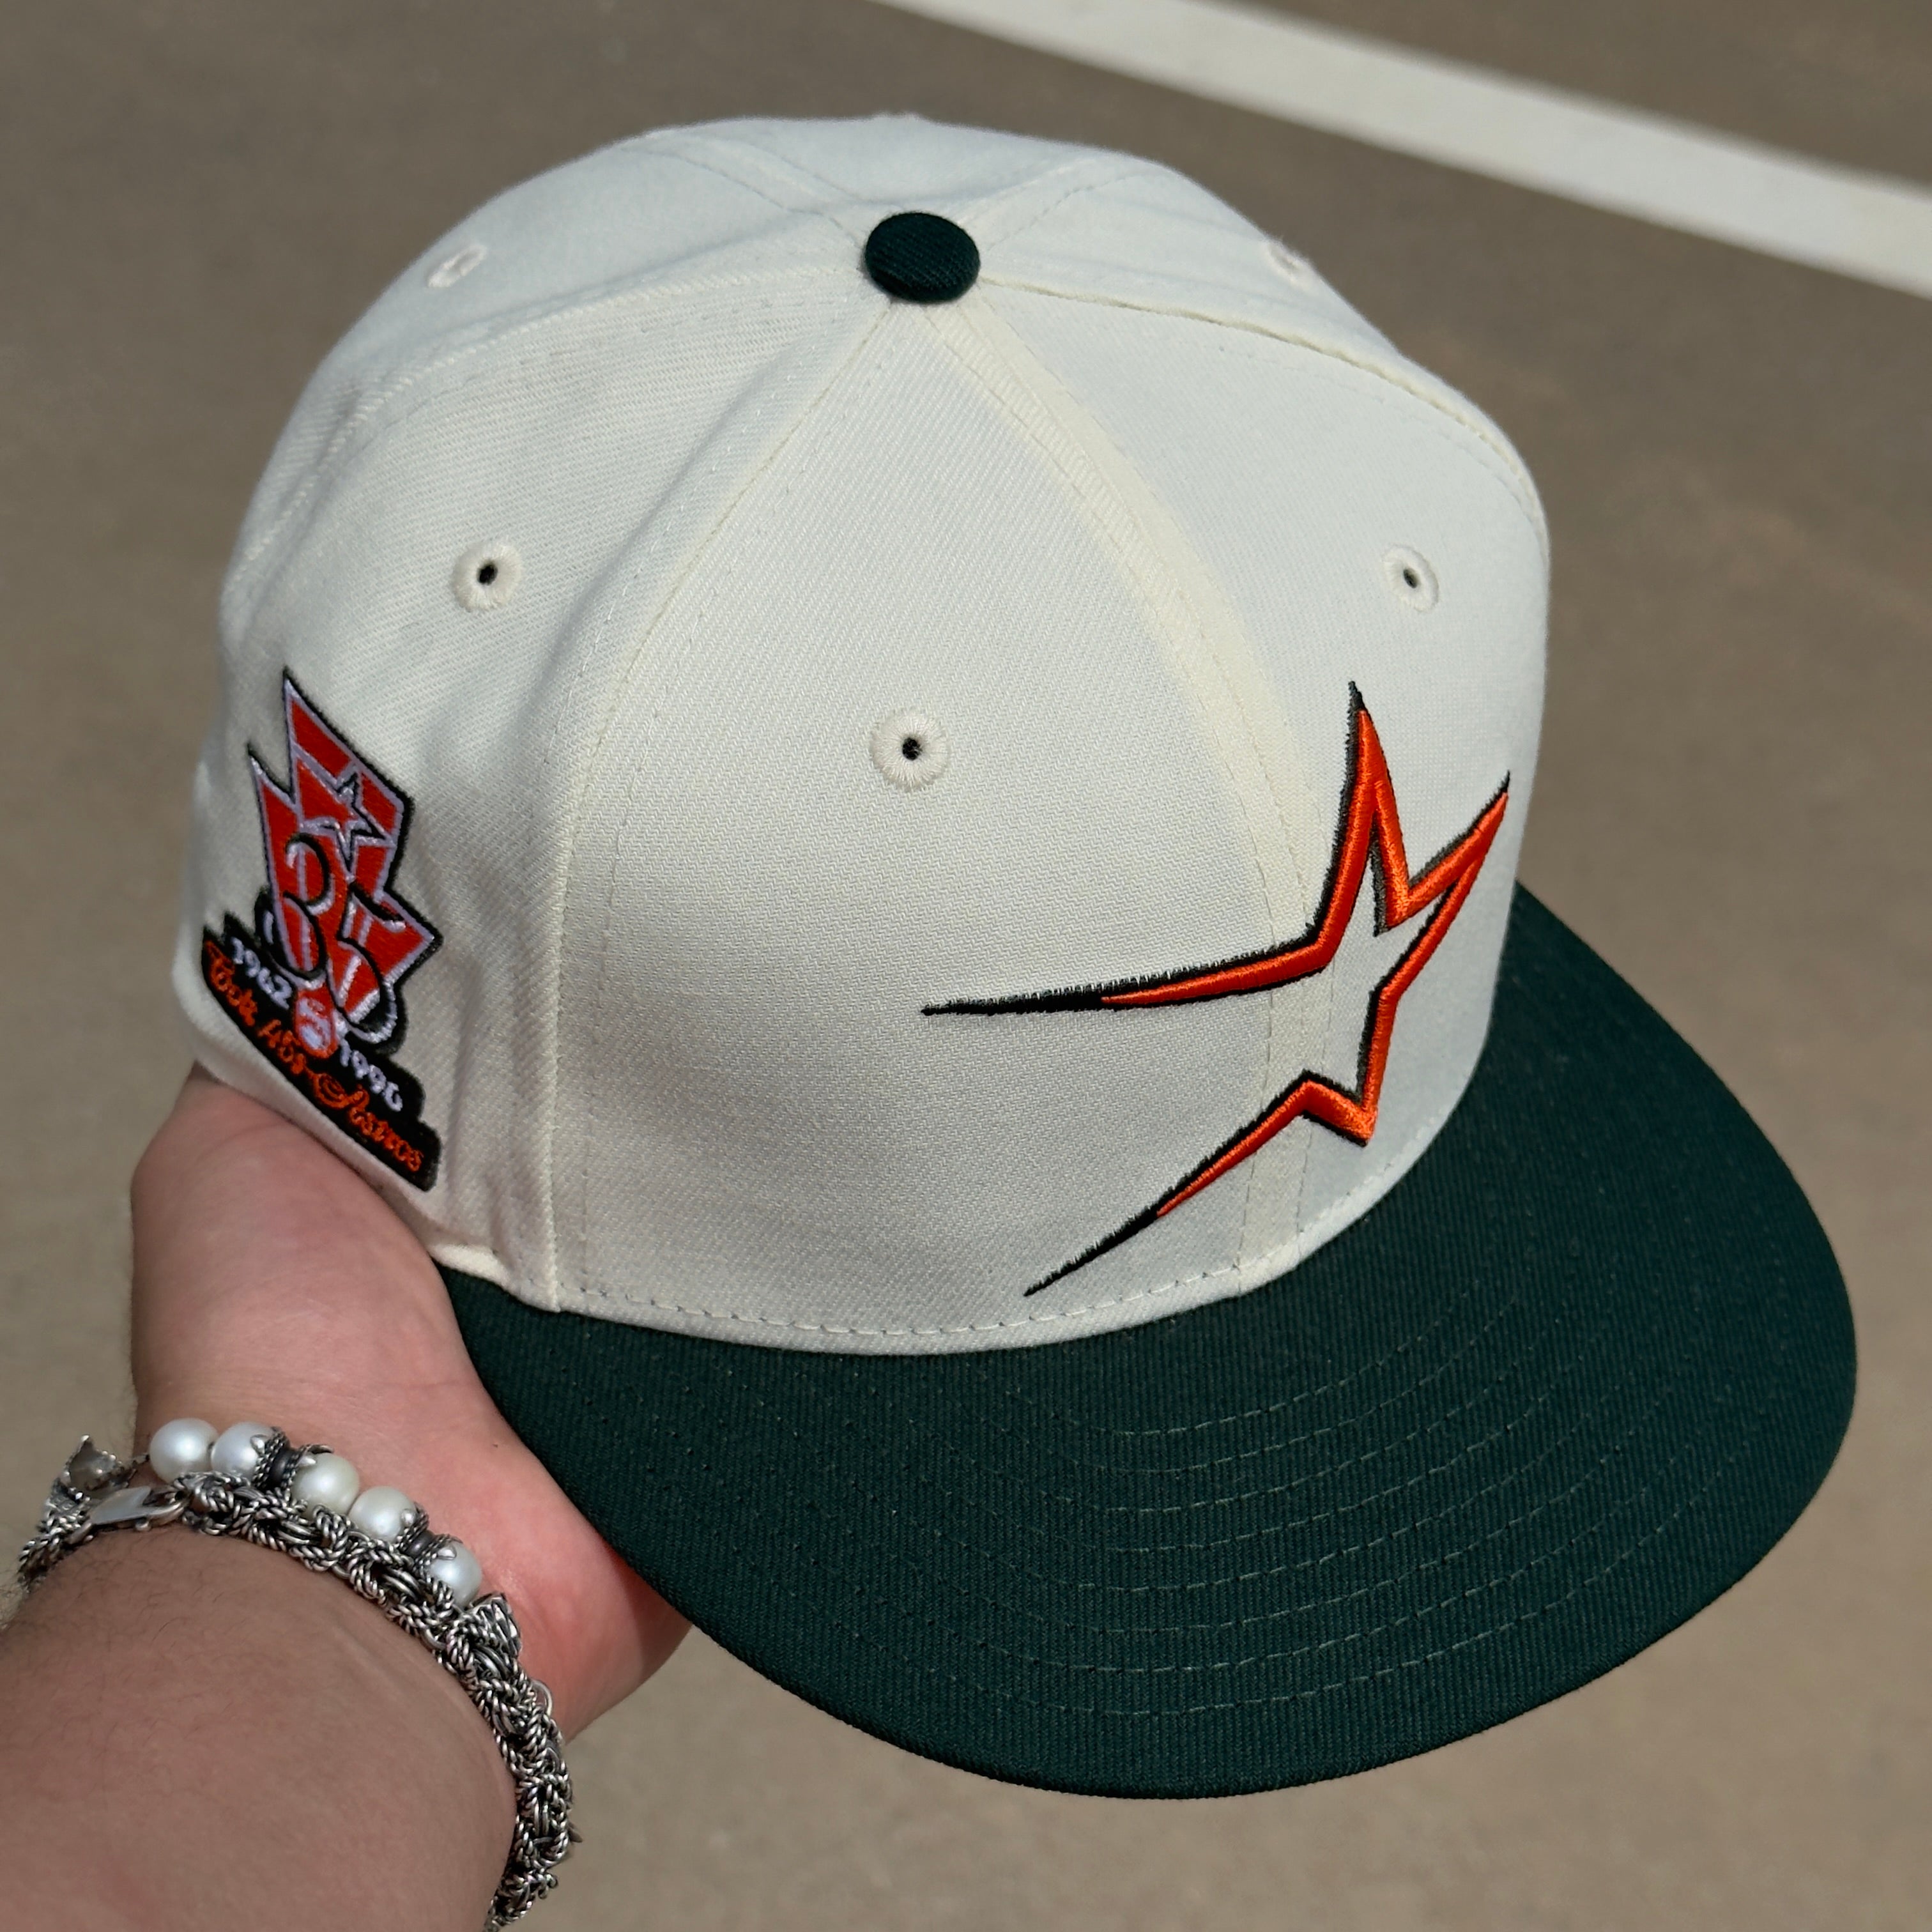 1/2 USED Chrome Houston Astros 35 Years Colt 59fifty New Era Fitted Hat Cap